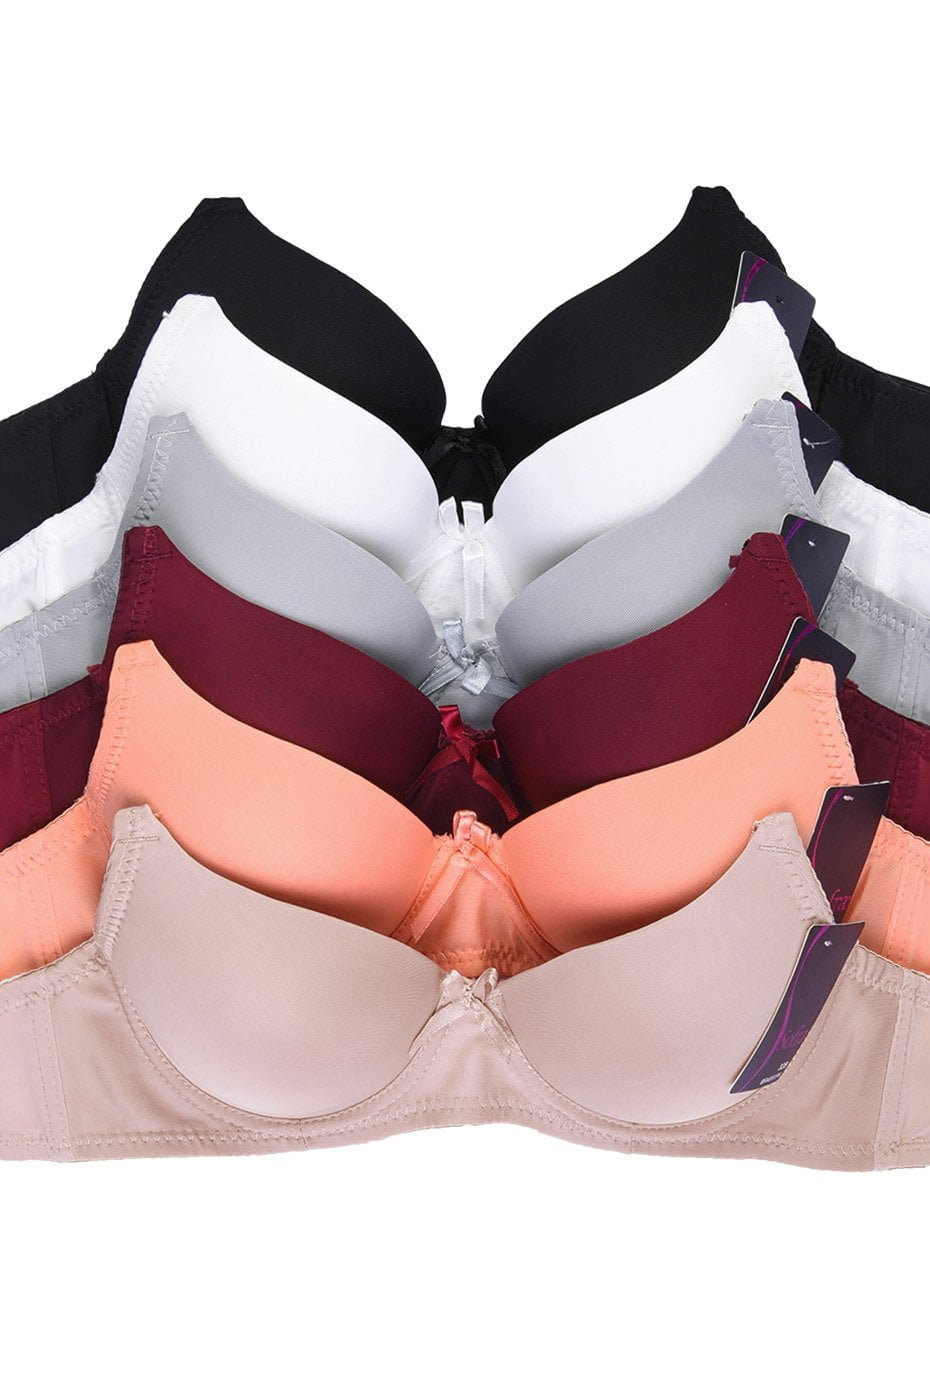 DailyWear Womens Everyday 6 Pack of Bras 32A, 4081P6